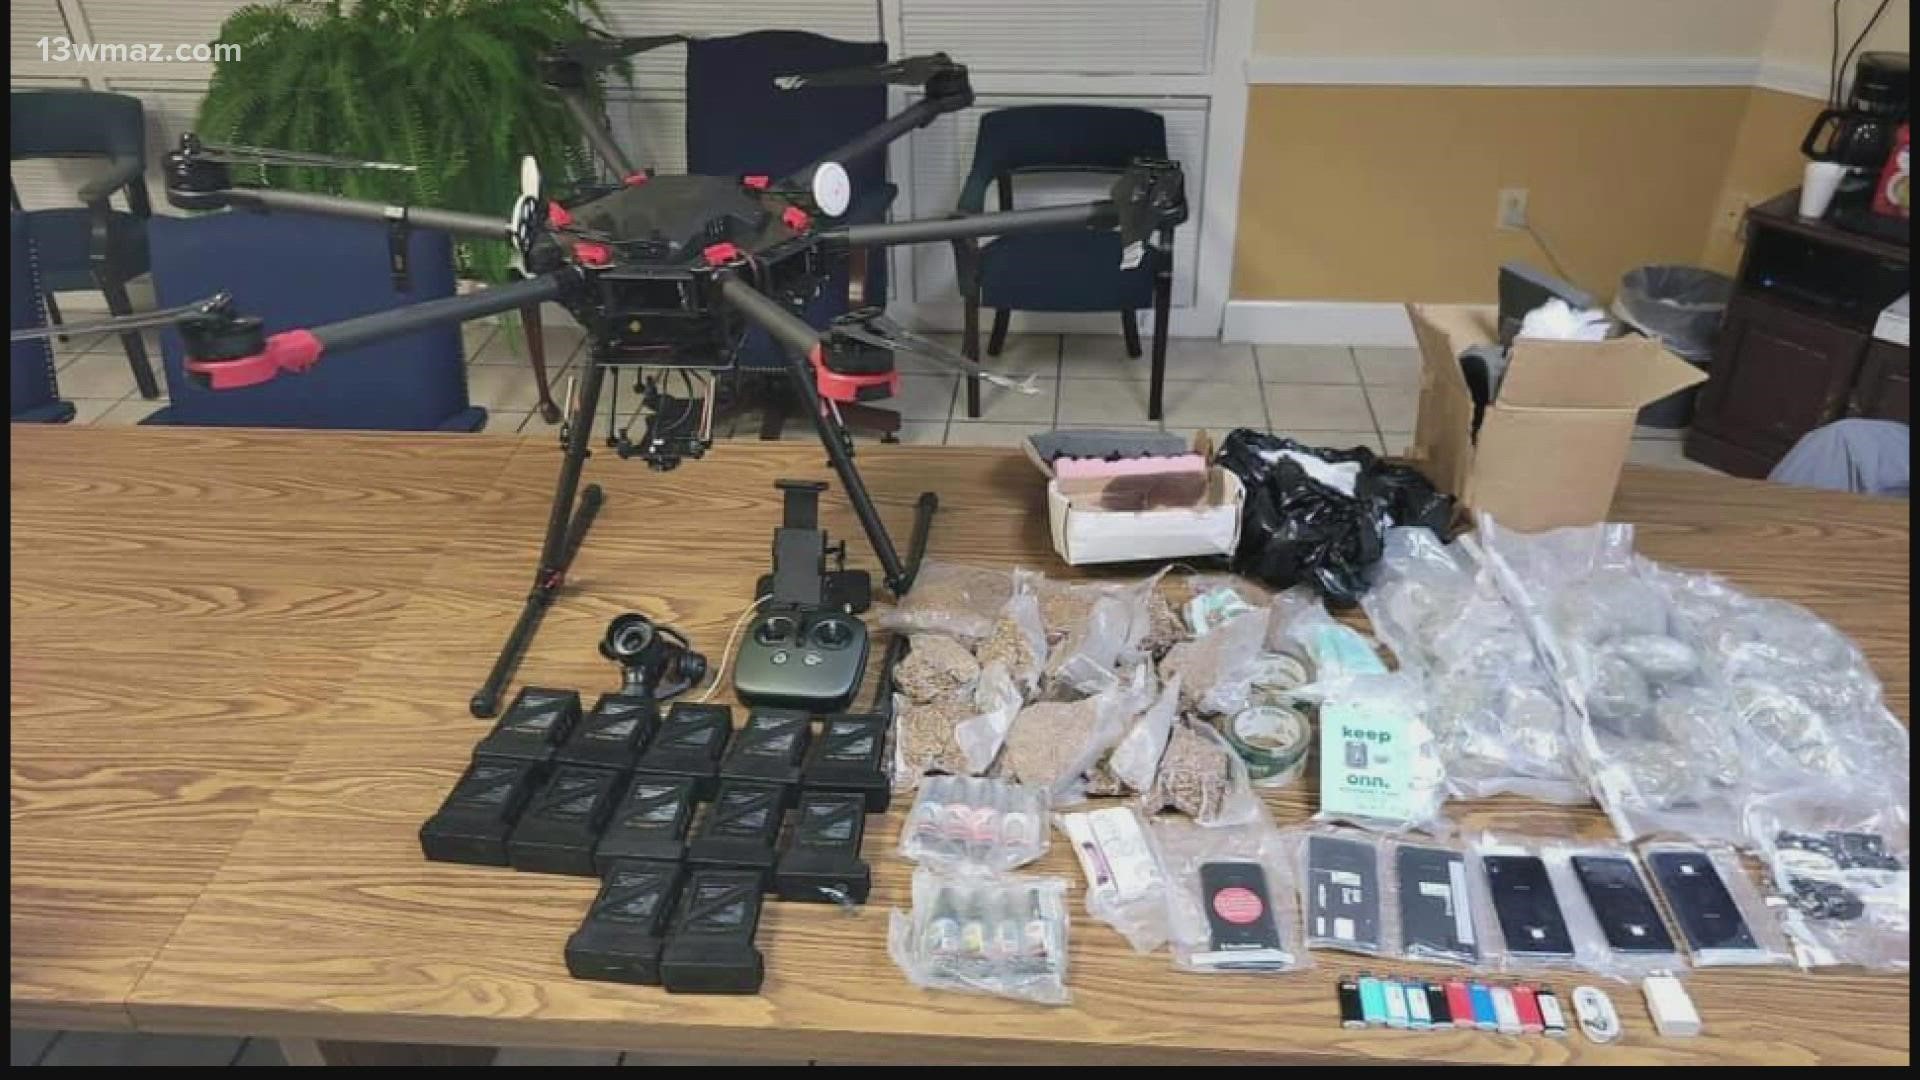 A photo from the drop shows batteries, lighters, cellphones, phone chargers, rolling papers and marijuana.